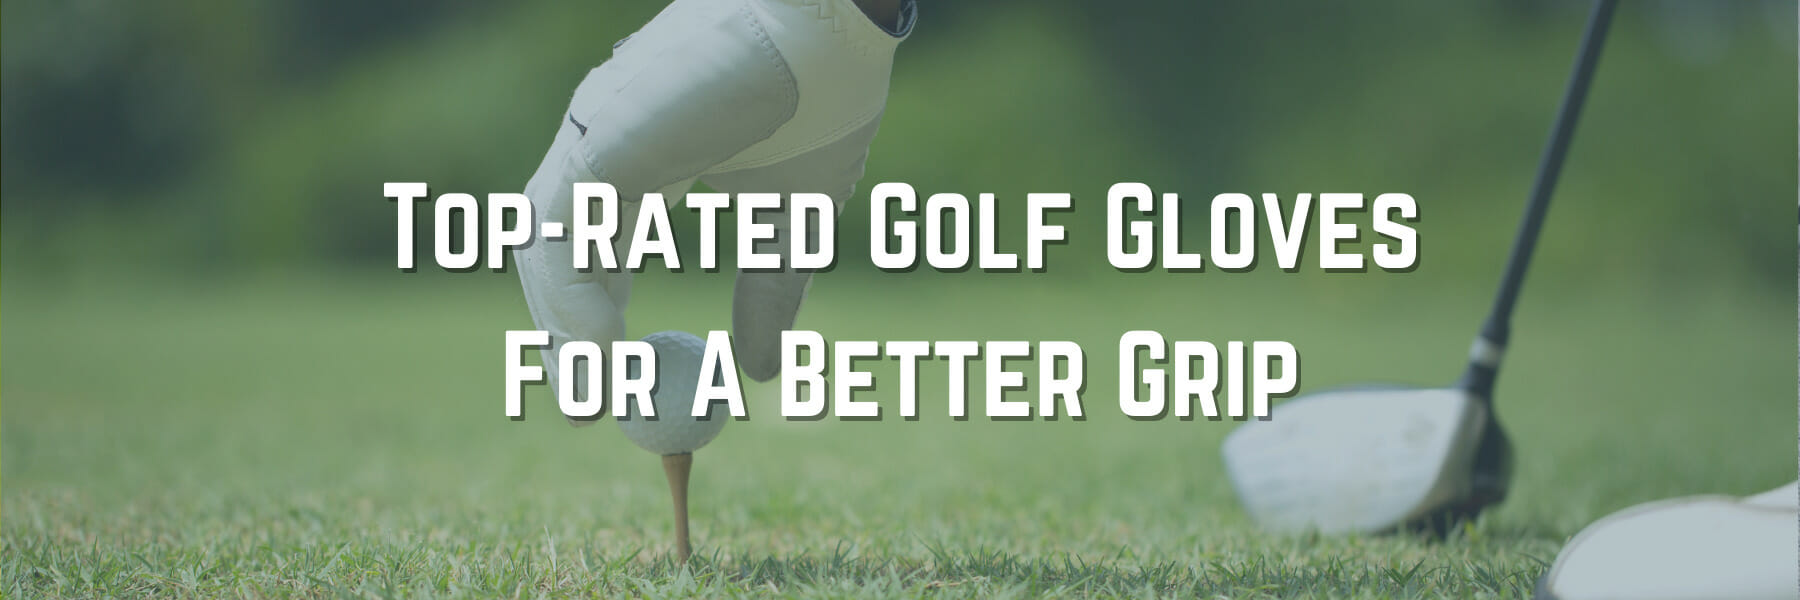 5 Top-Rated Golf Gloves For A Better Grip